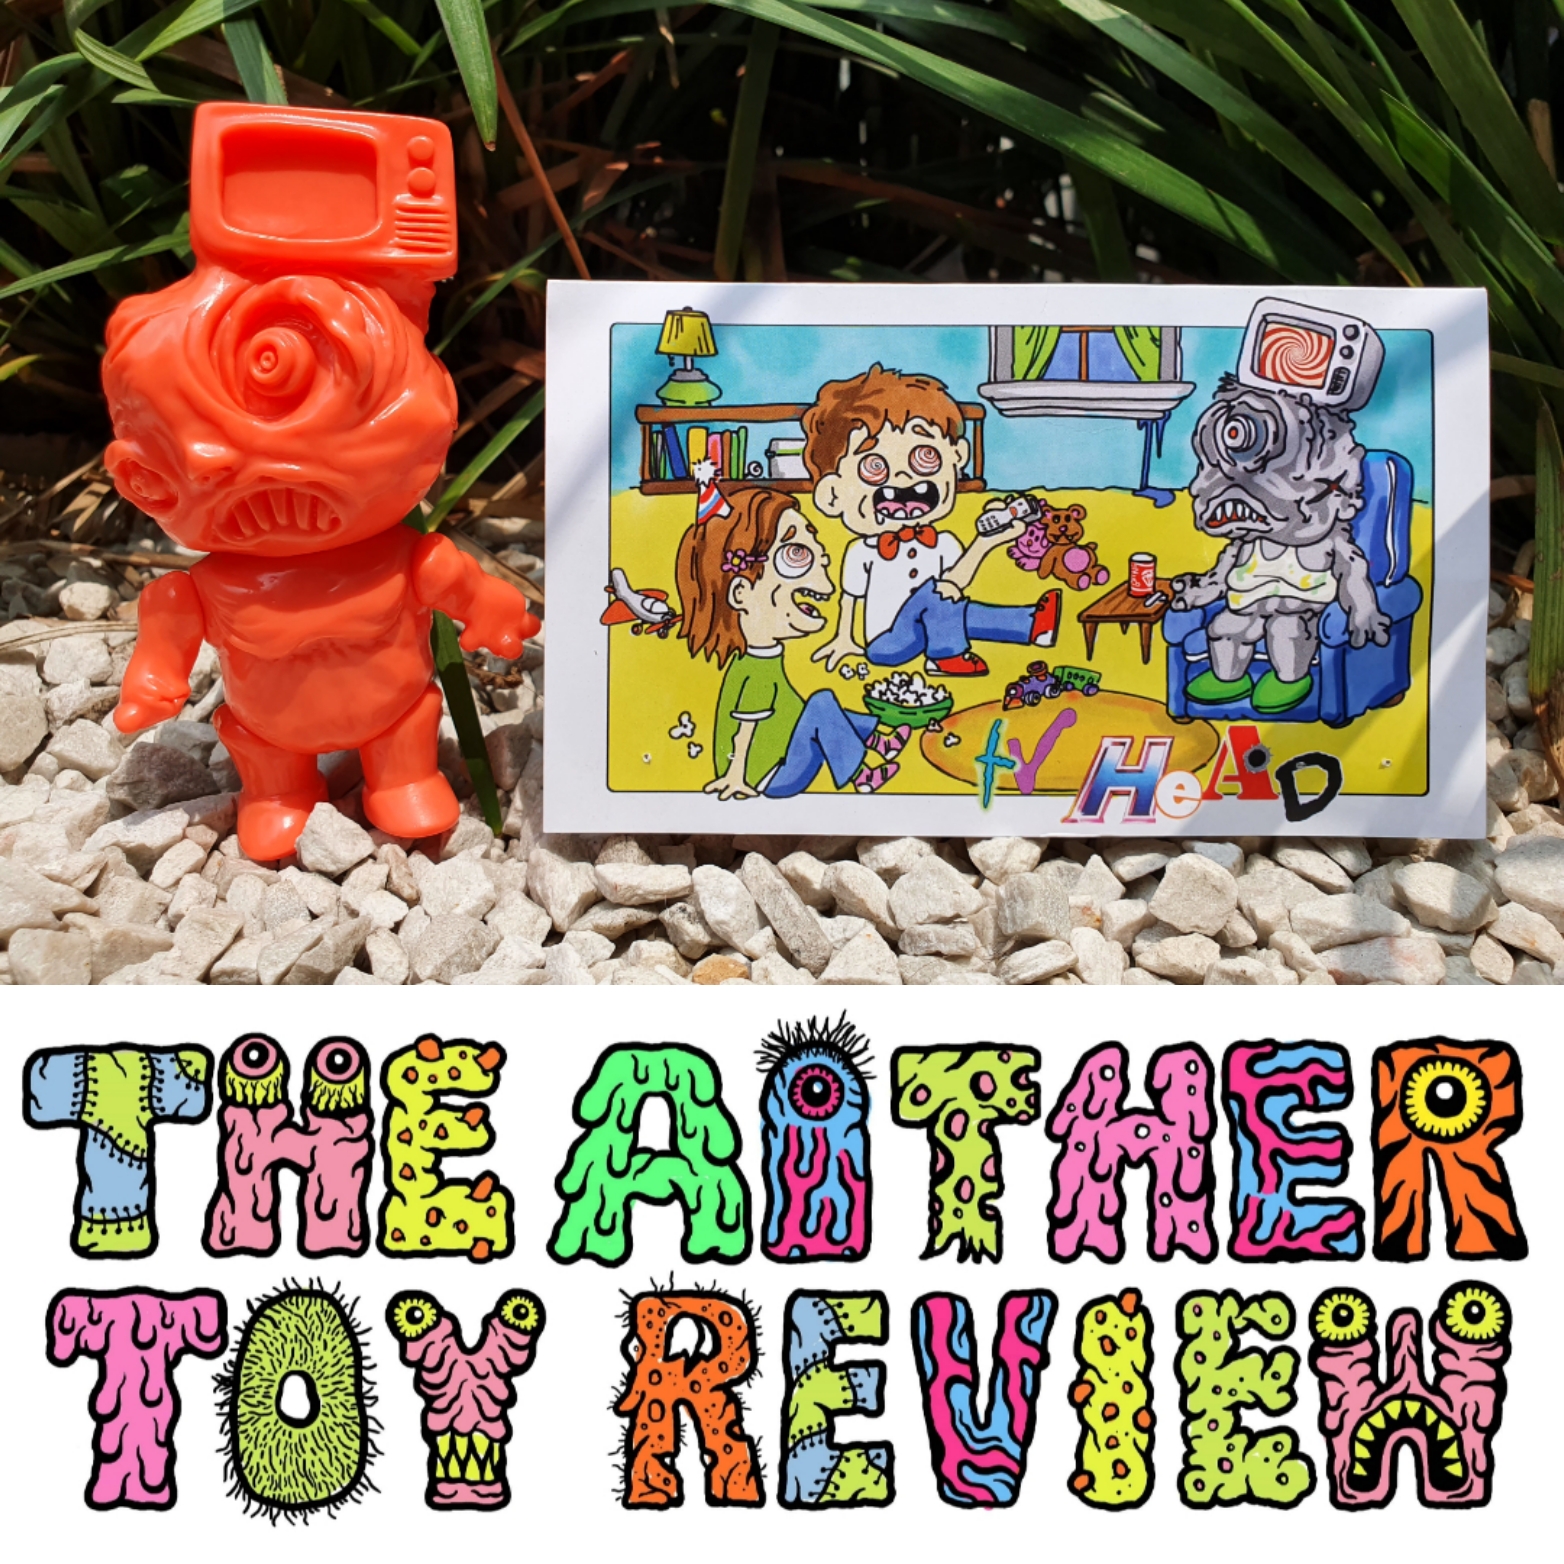 Toy Review – The TV Head Soft Vinyl Figure from BinBizii + his ‘Phobia Toys’ brand.